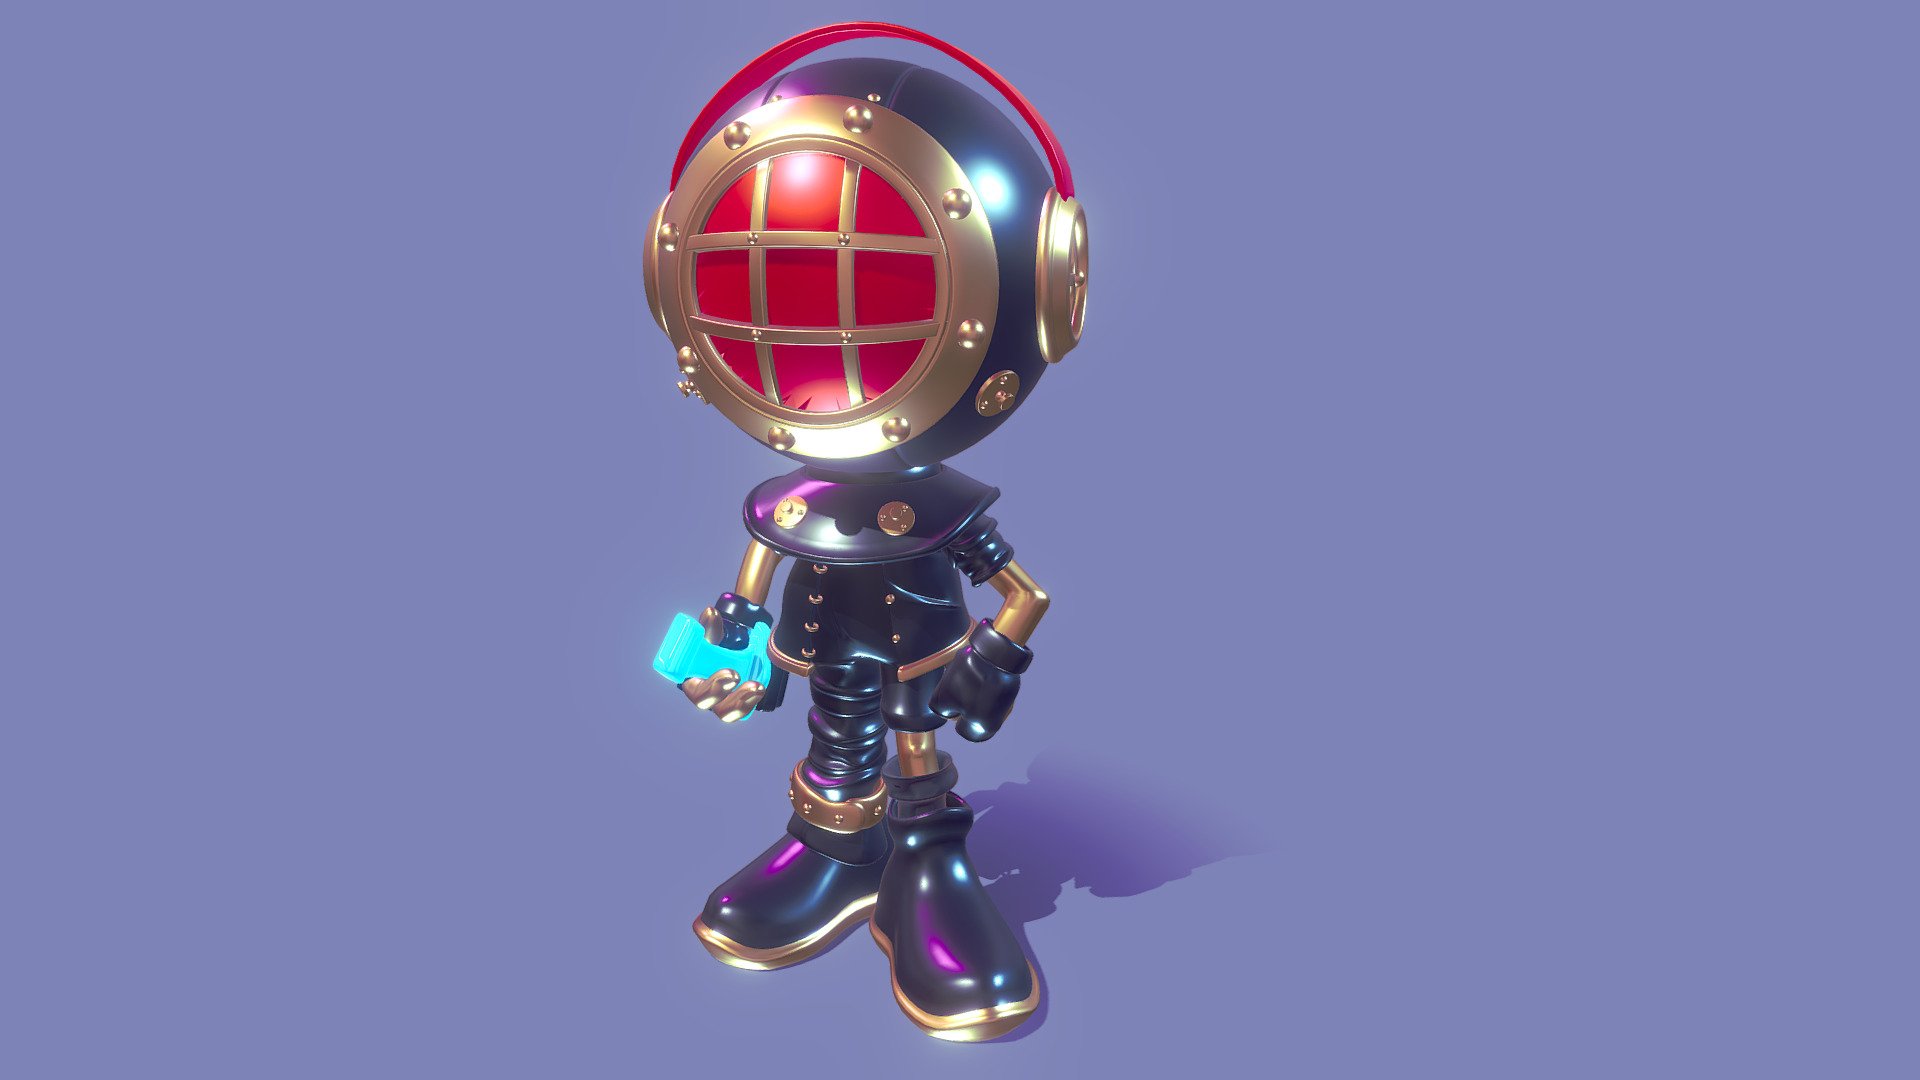 toy - Diver - 3D model by dingfangqiang 3d model